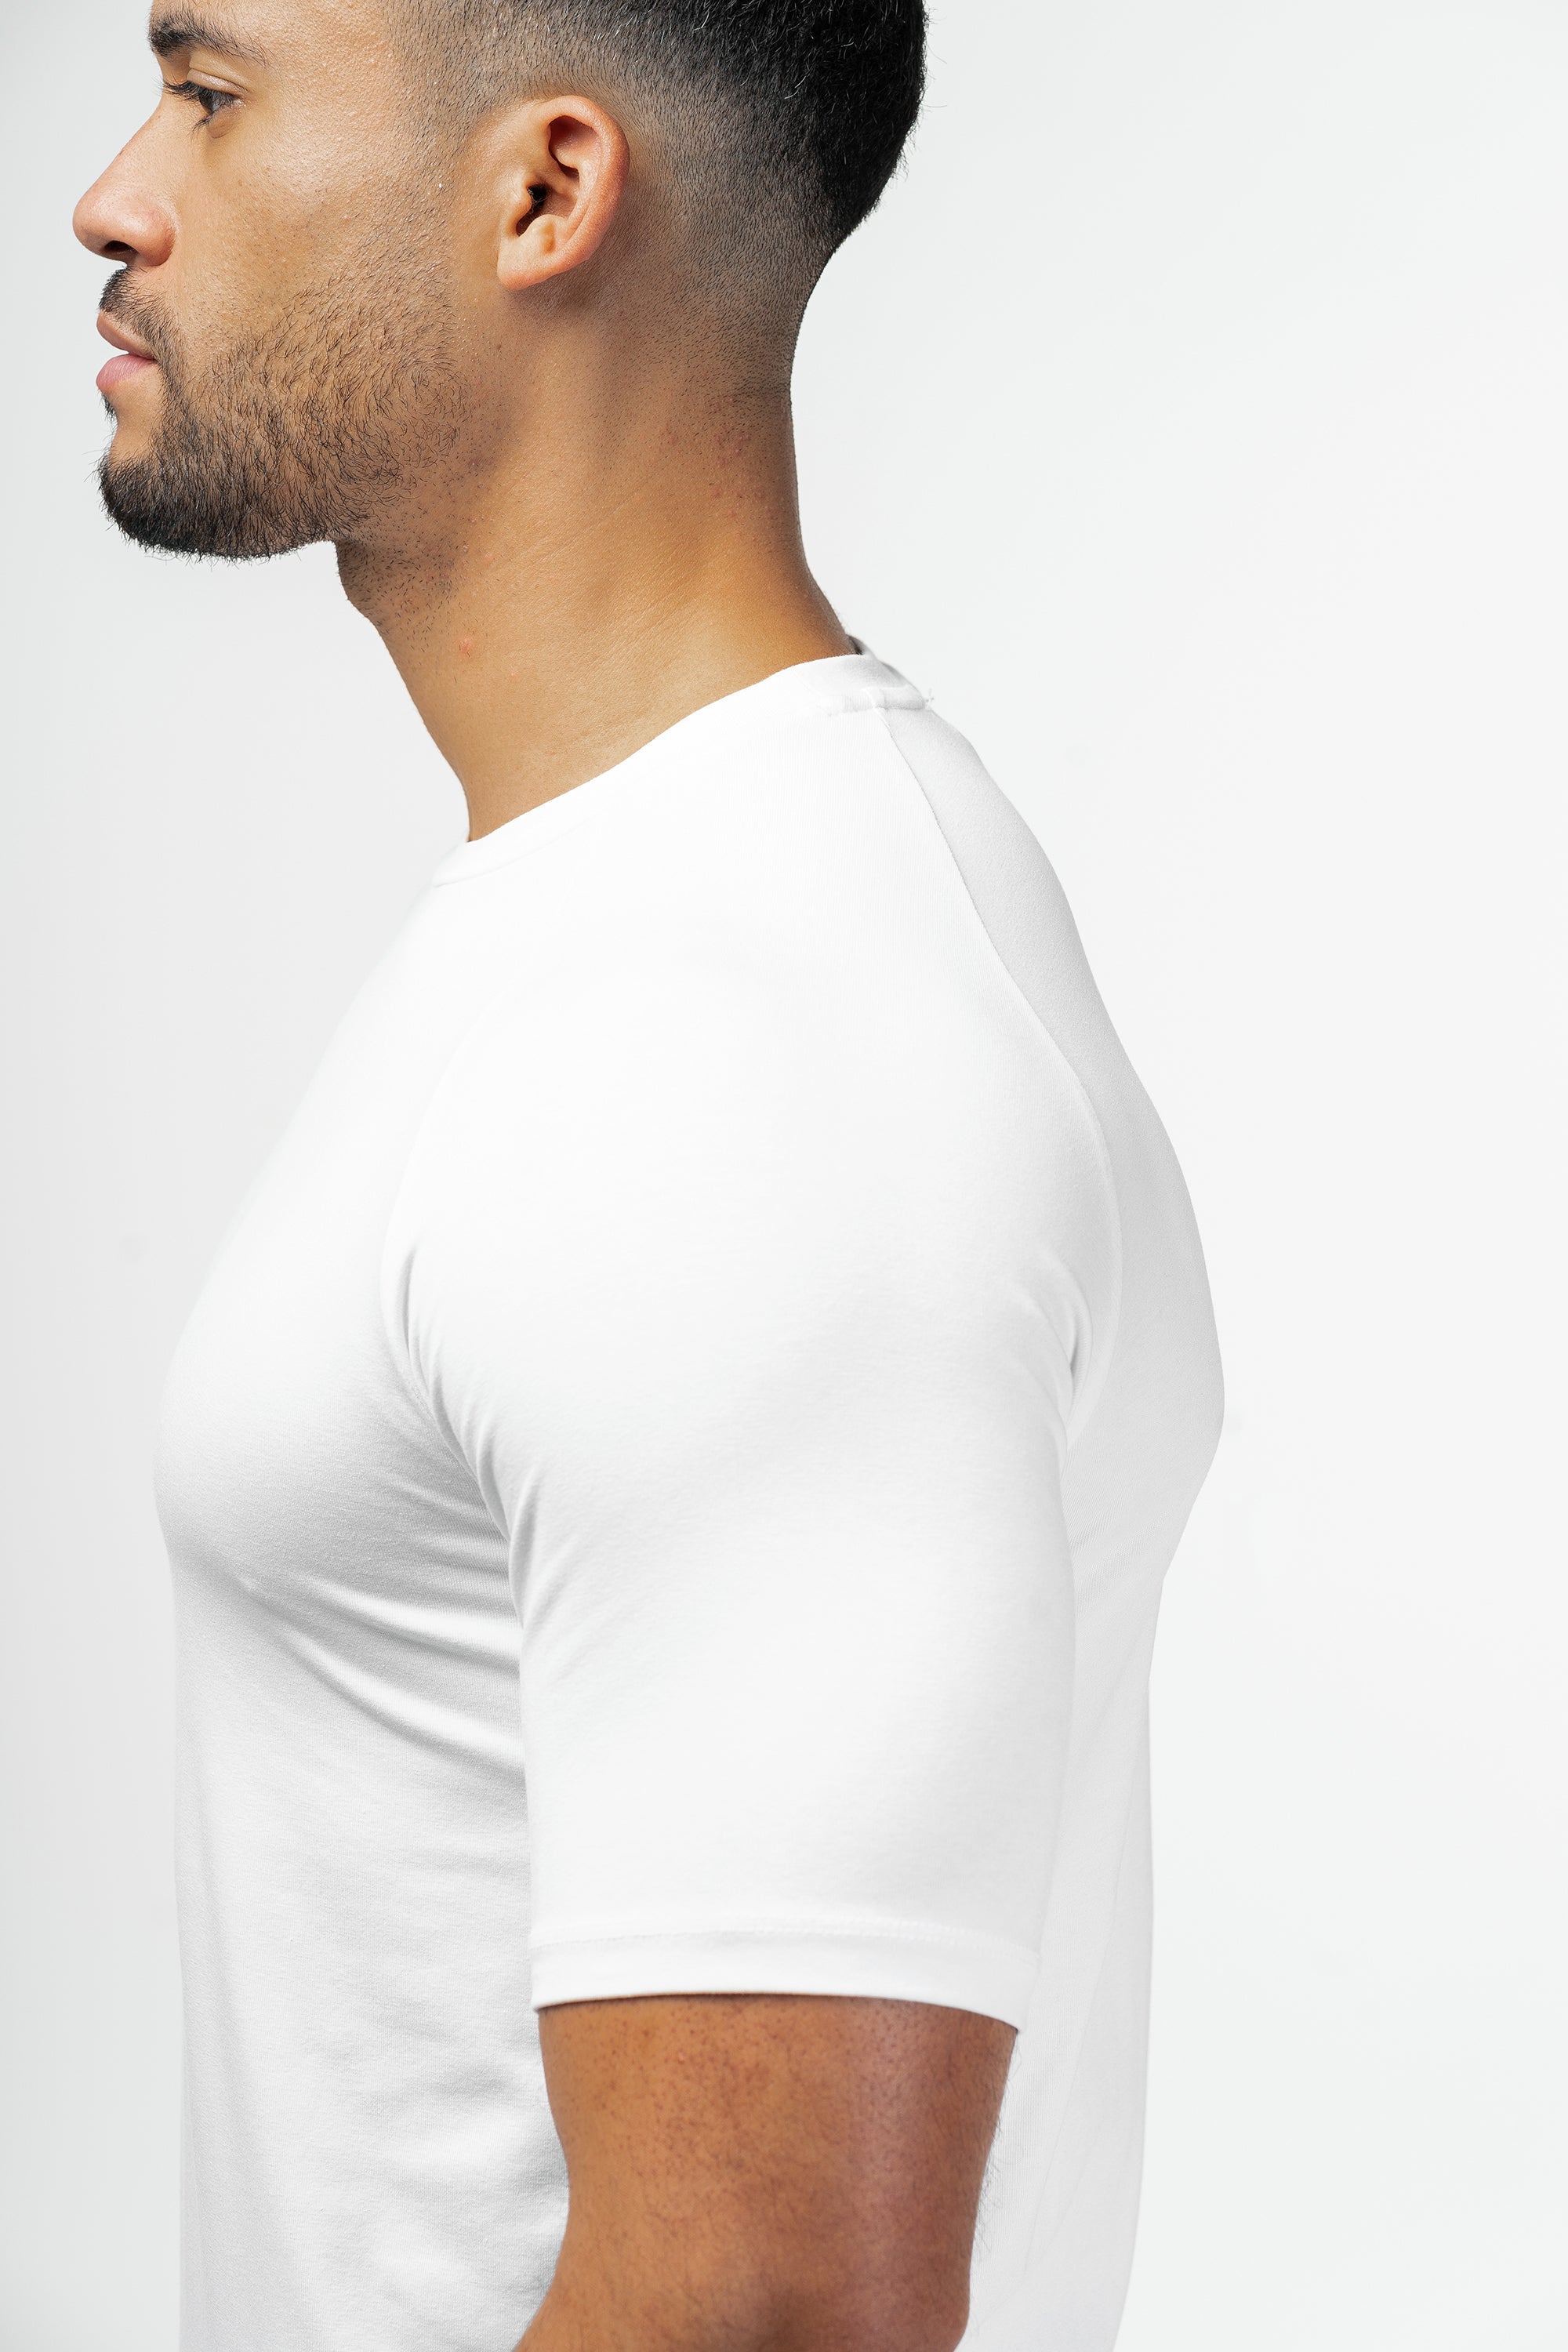 THE MUSCLE BASIC T-SHIRT - WHITE